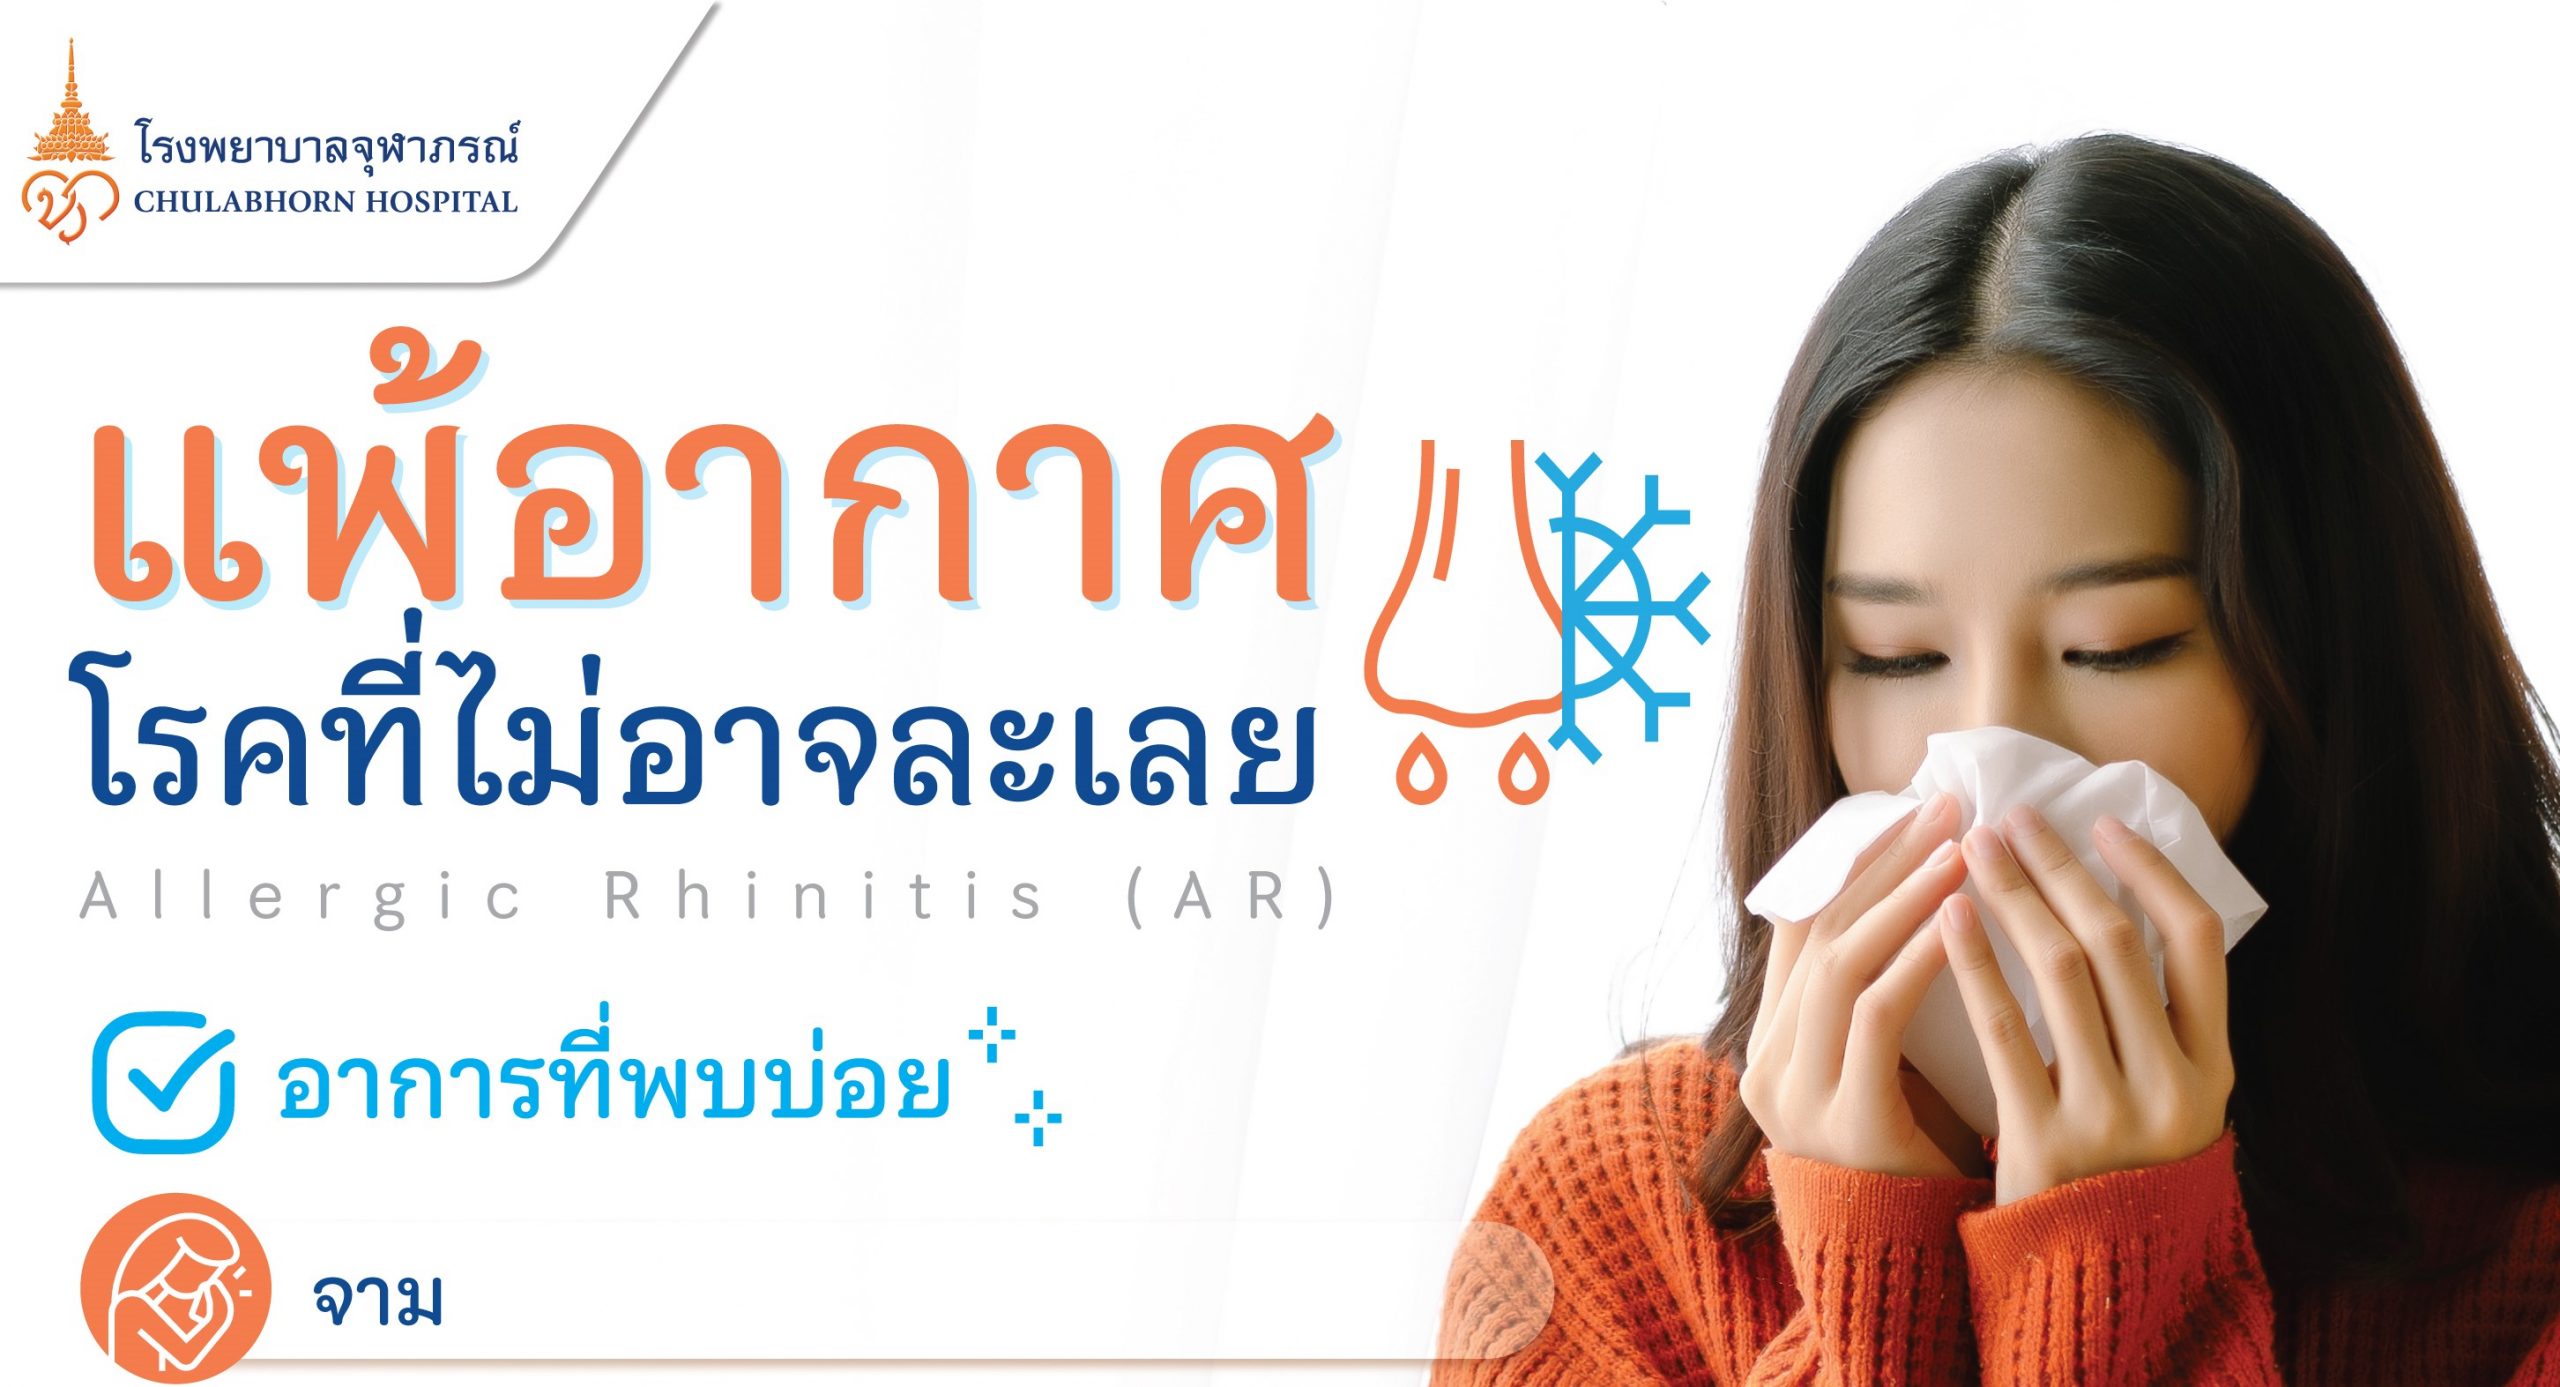 Air allergies, a disease that cannot be ignored – Chulabhorn Channel